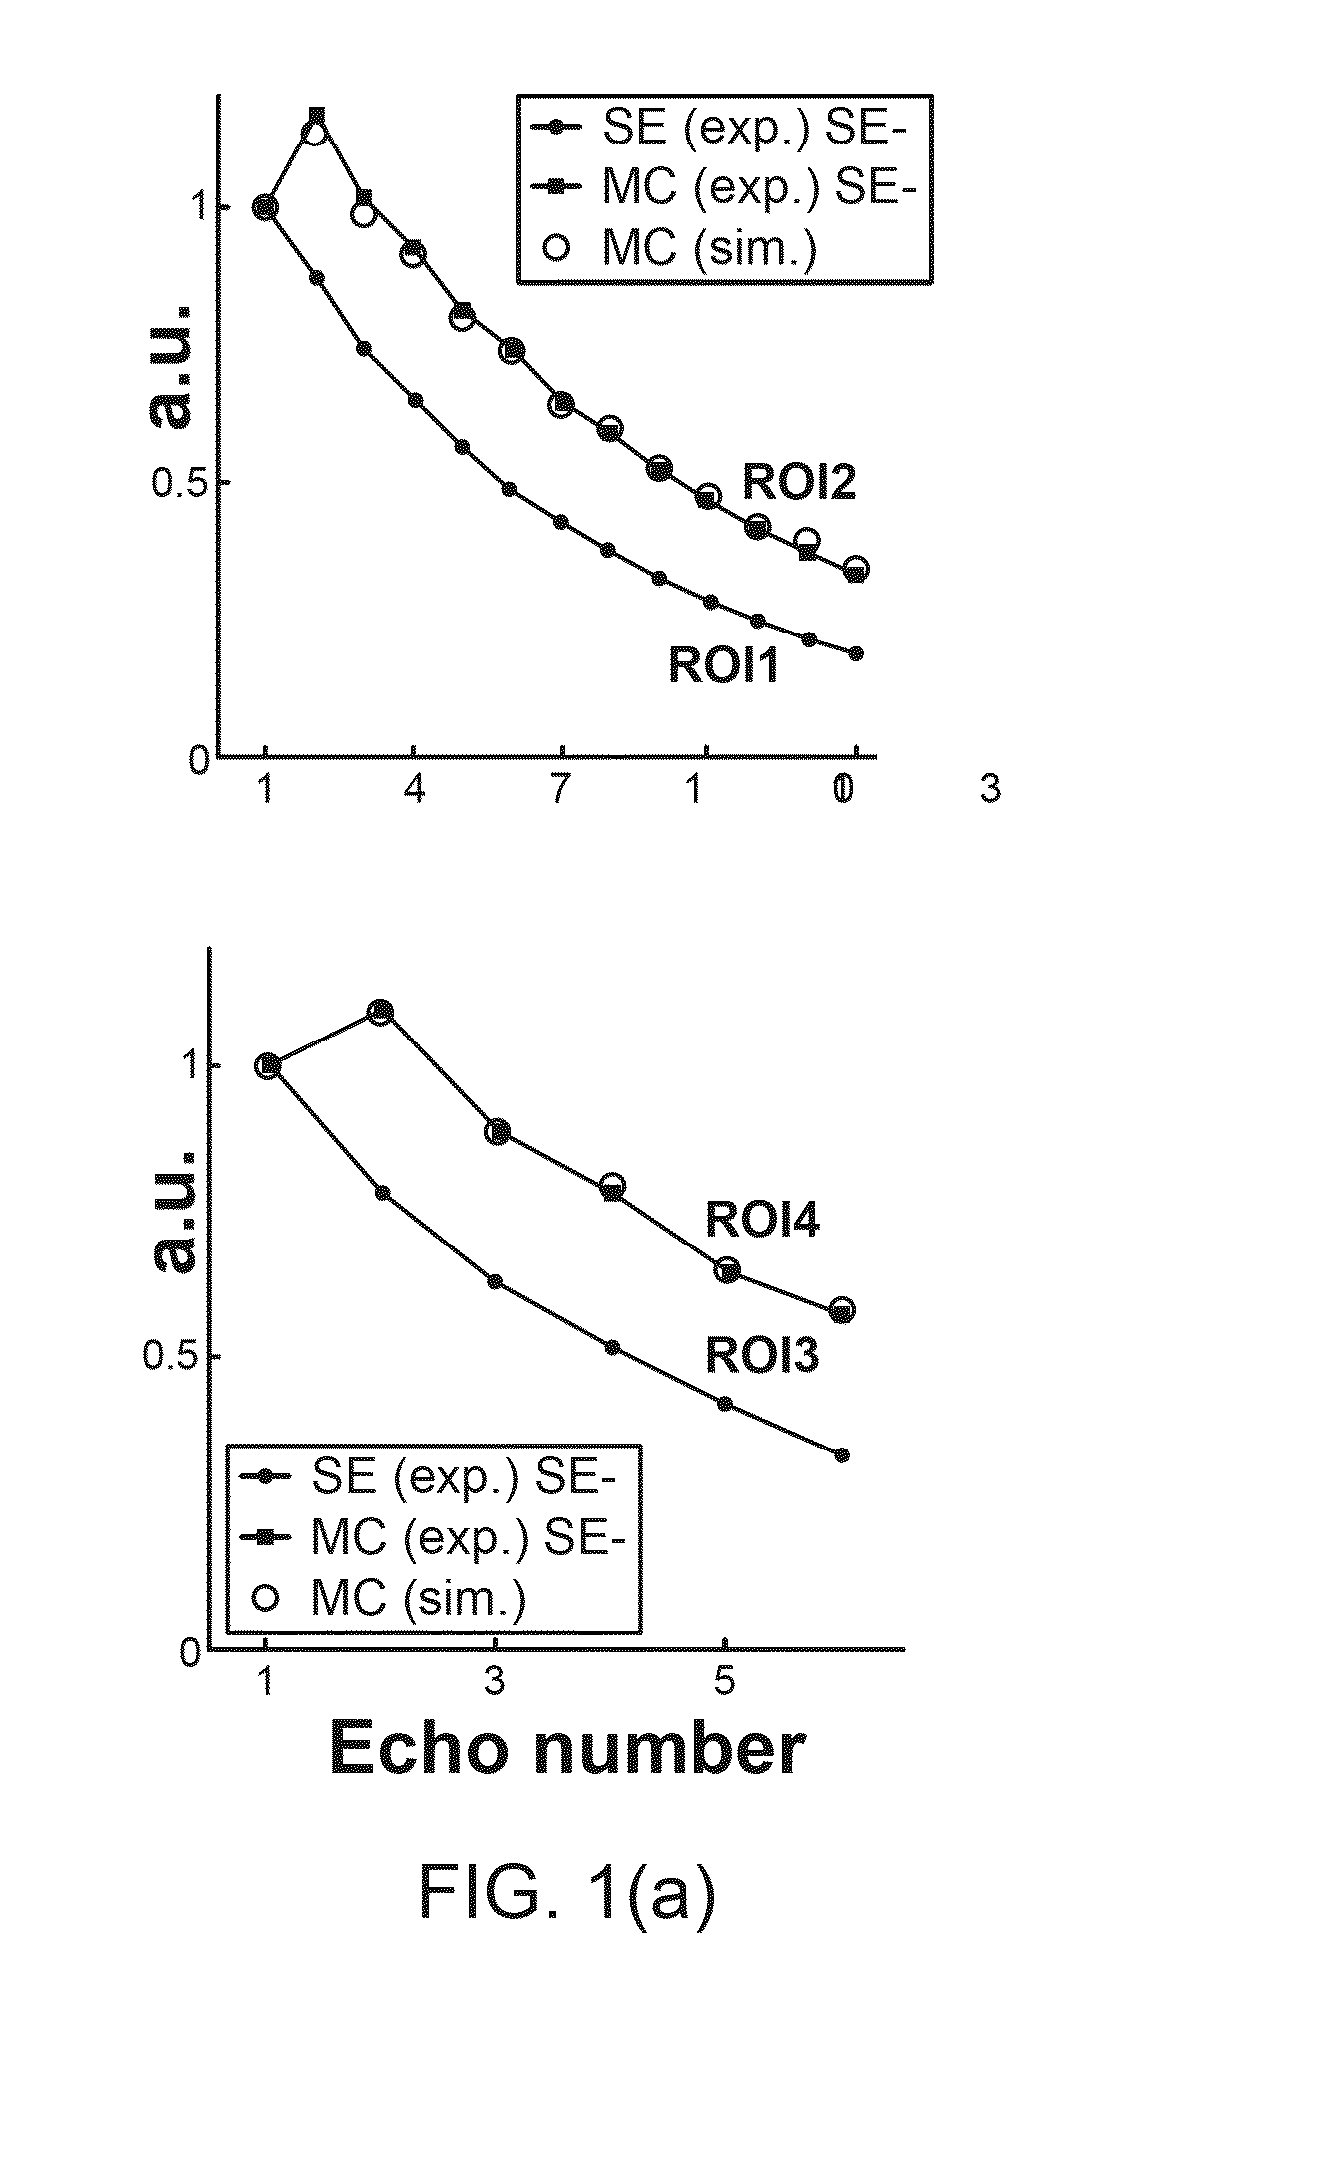 Method and device for accurate quantification of t2 relaxation times based on fast spin-echo nmr sequences